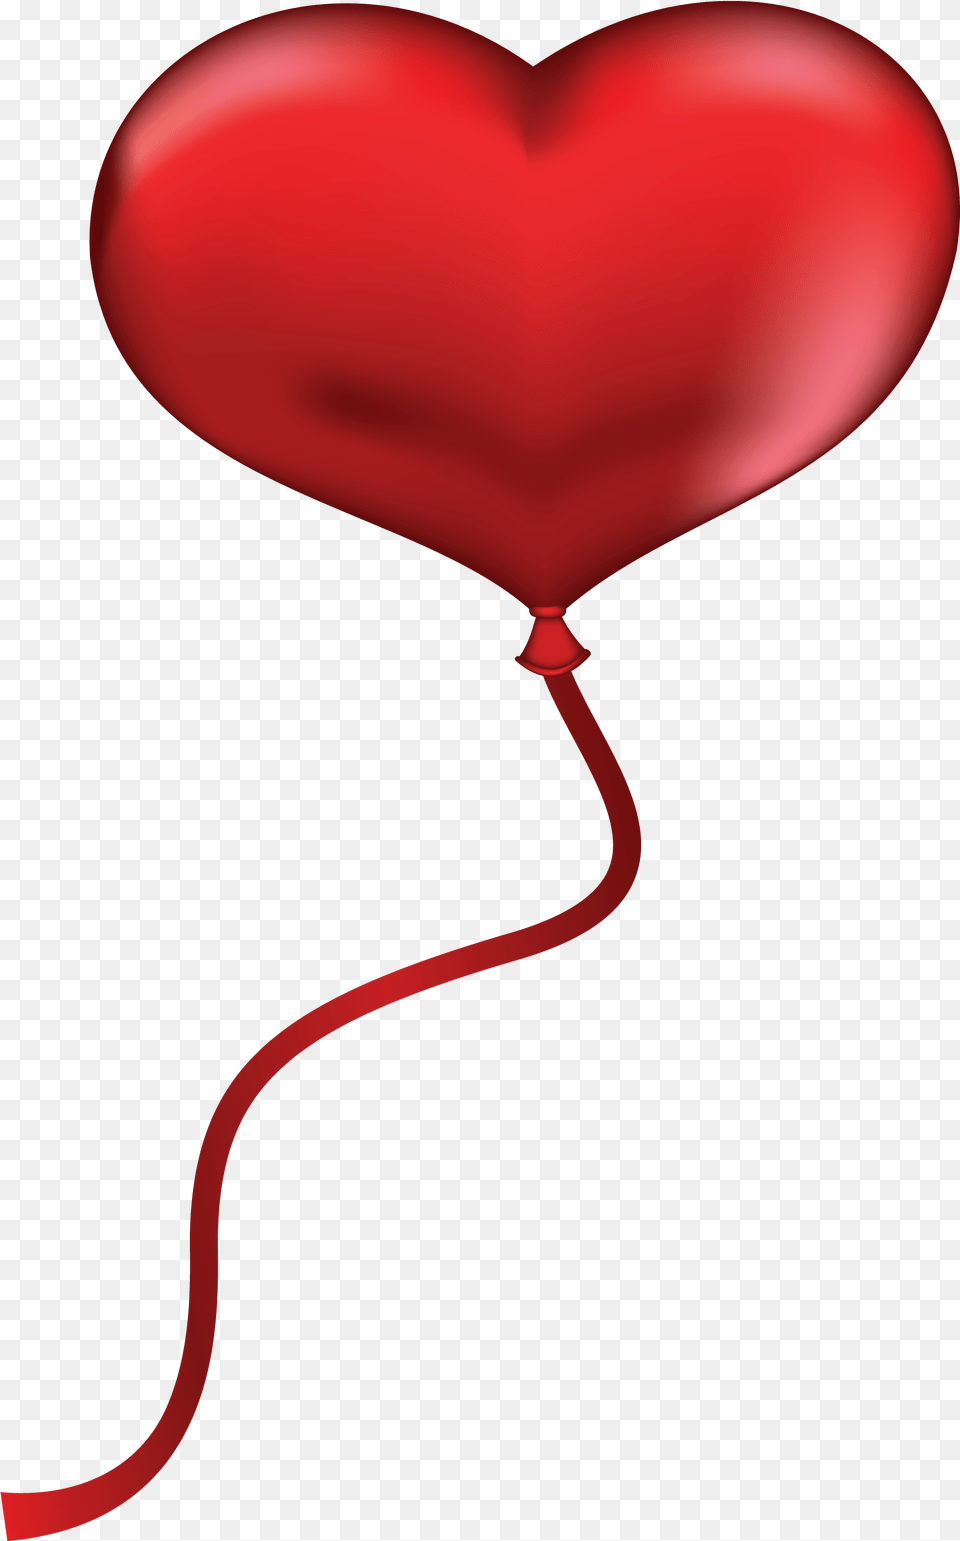 Heart Balloons High Quality Image Clip Art Heart Balloon Free Png